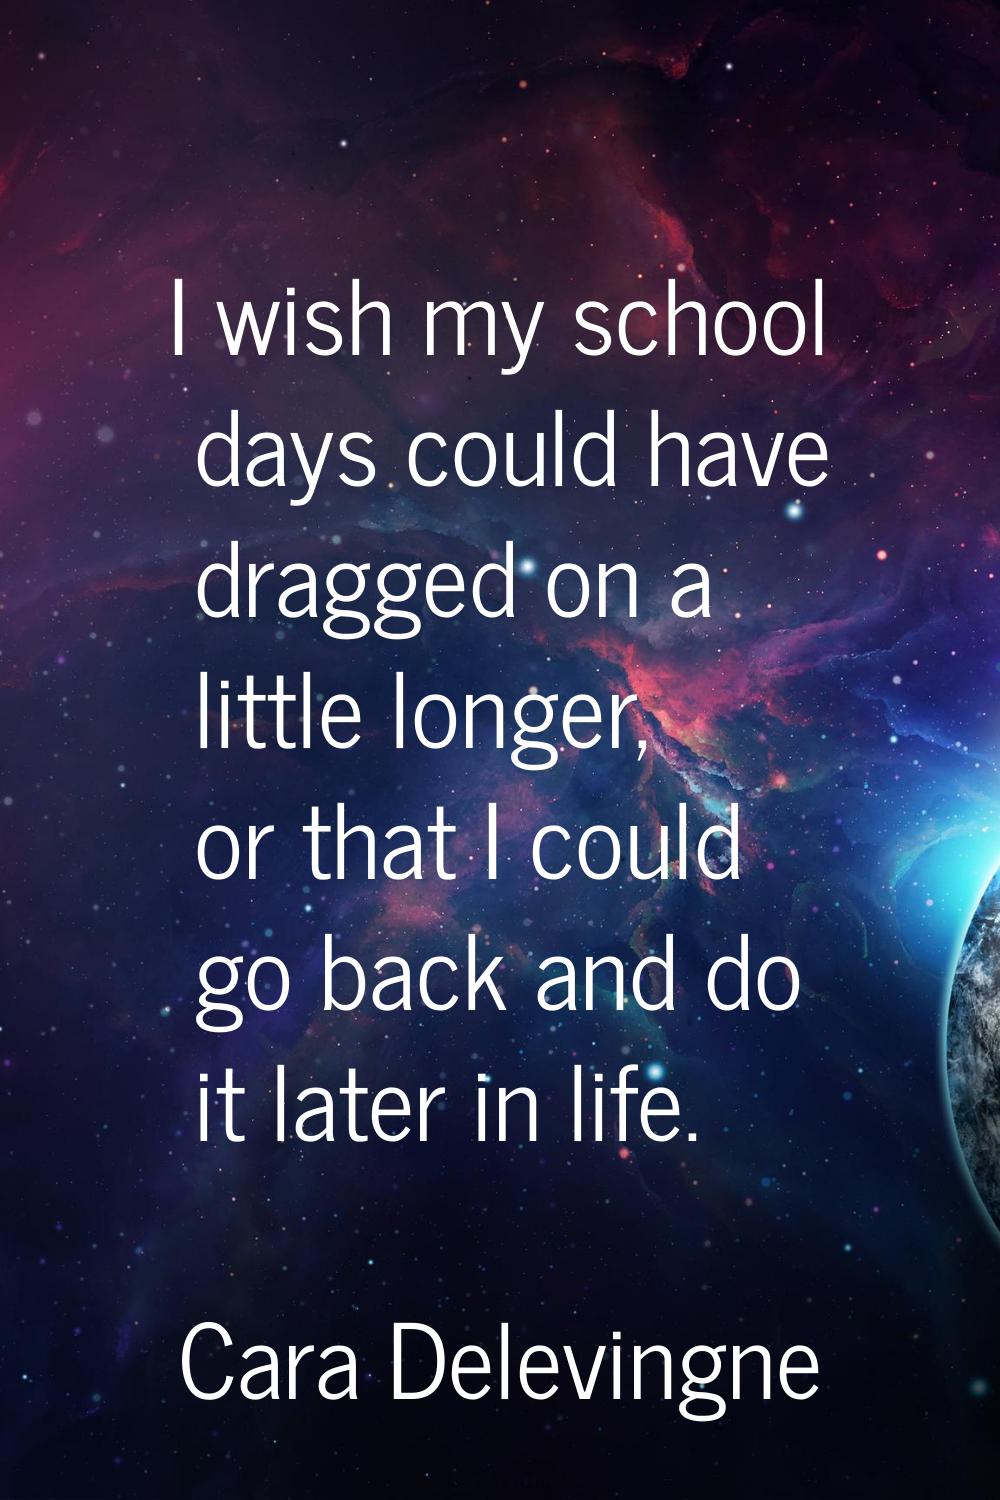 I wish my school days could have dragged on a little longer, or that I could go back and do it late